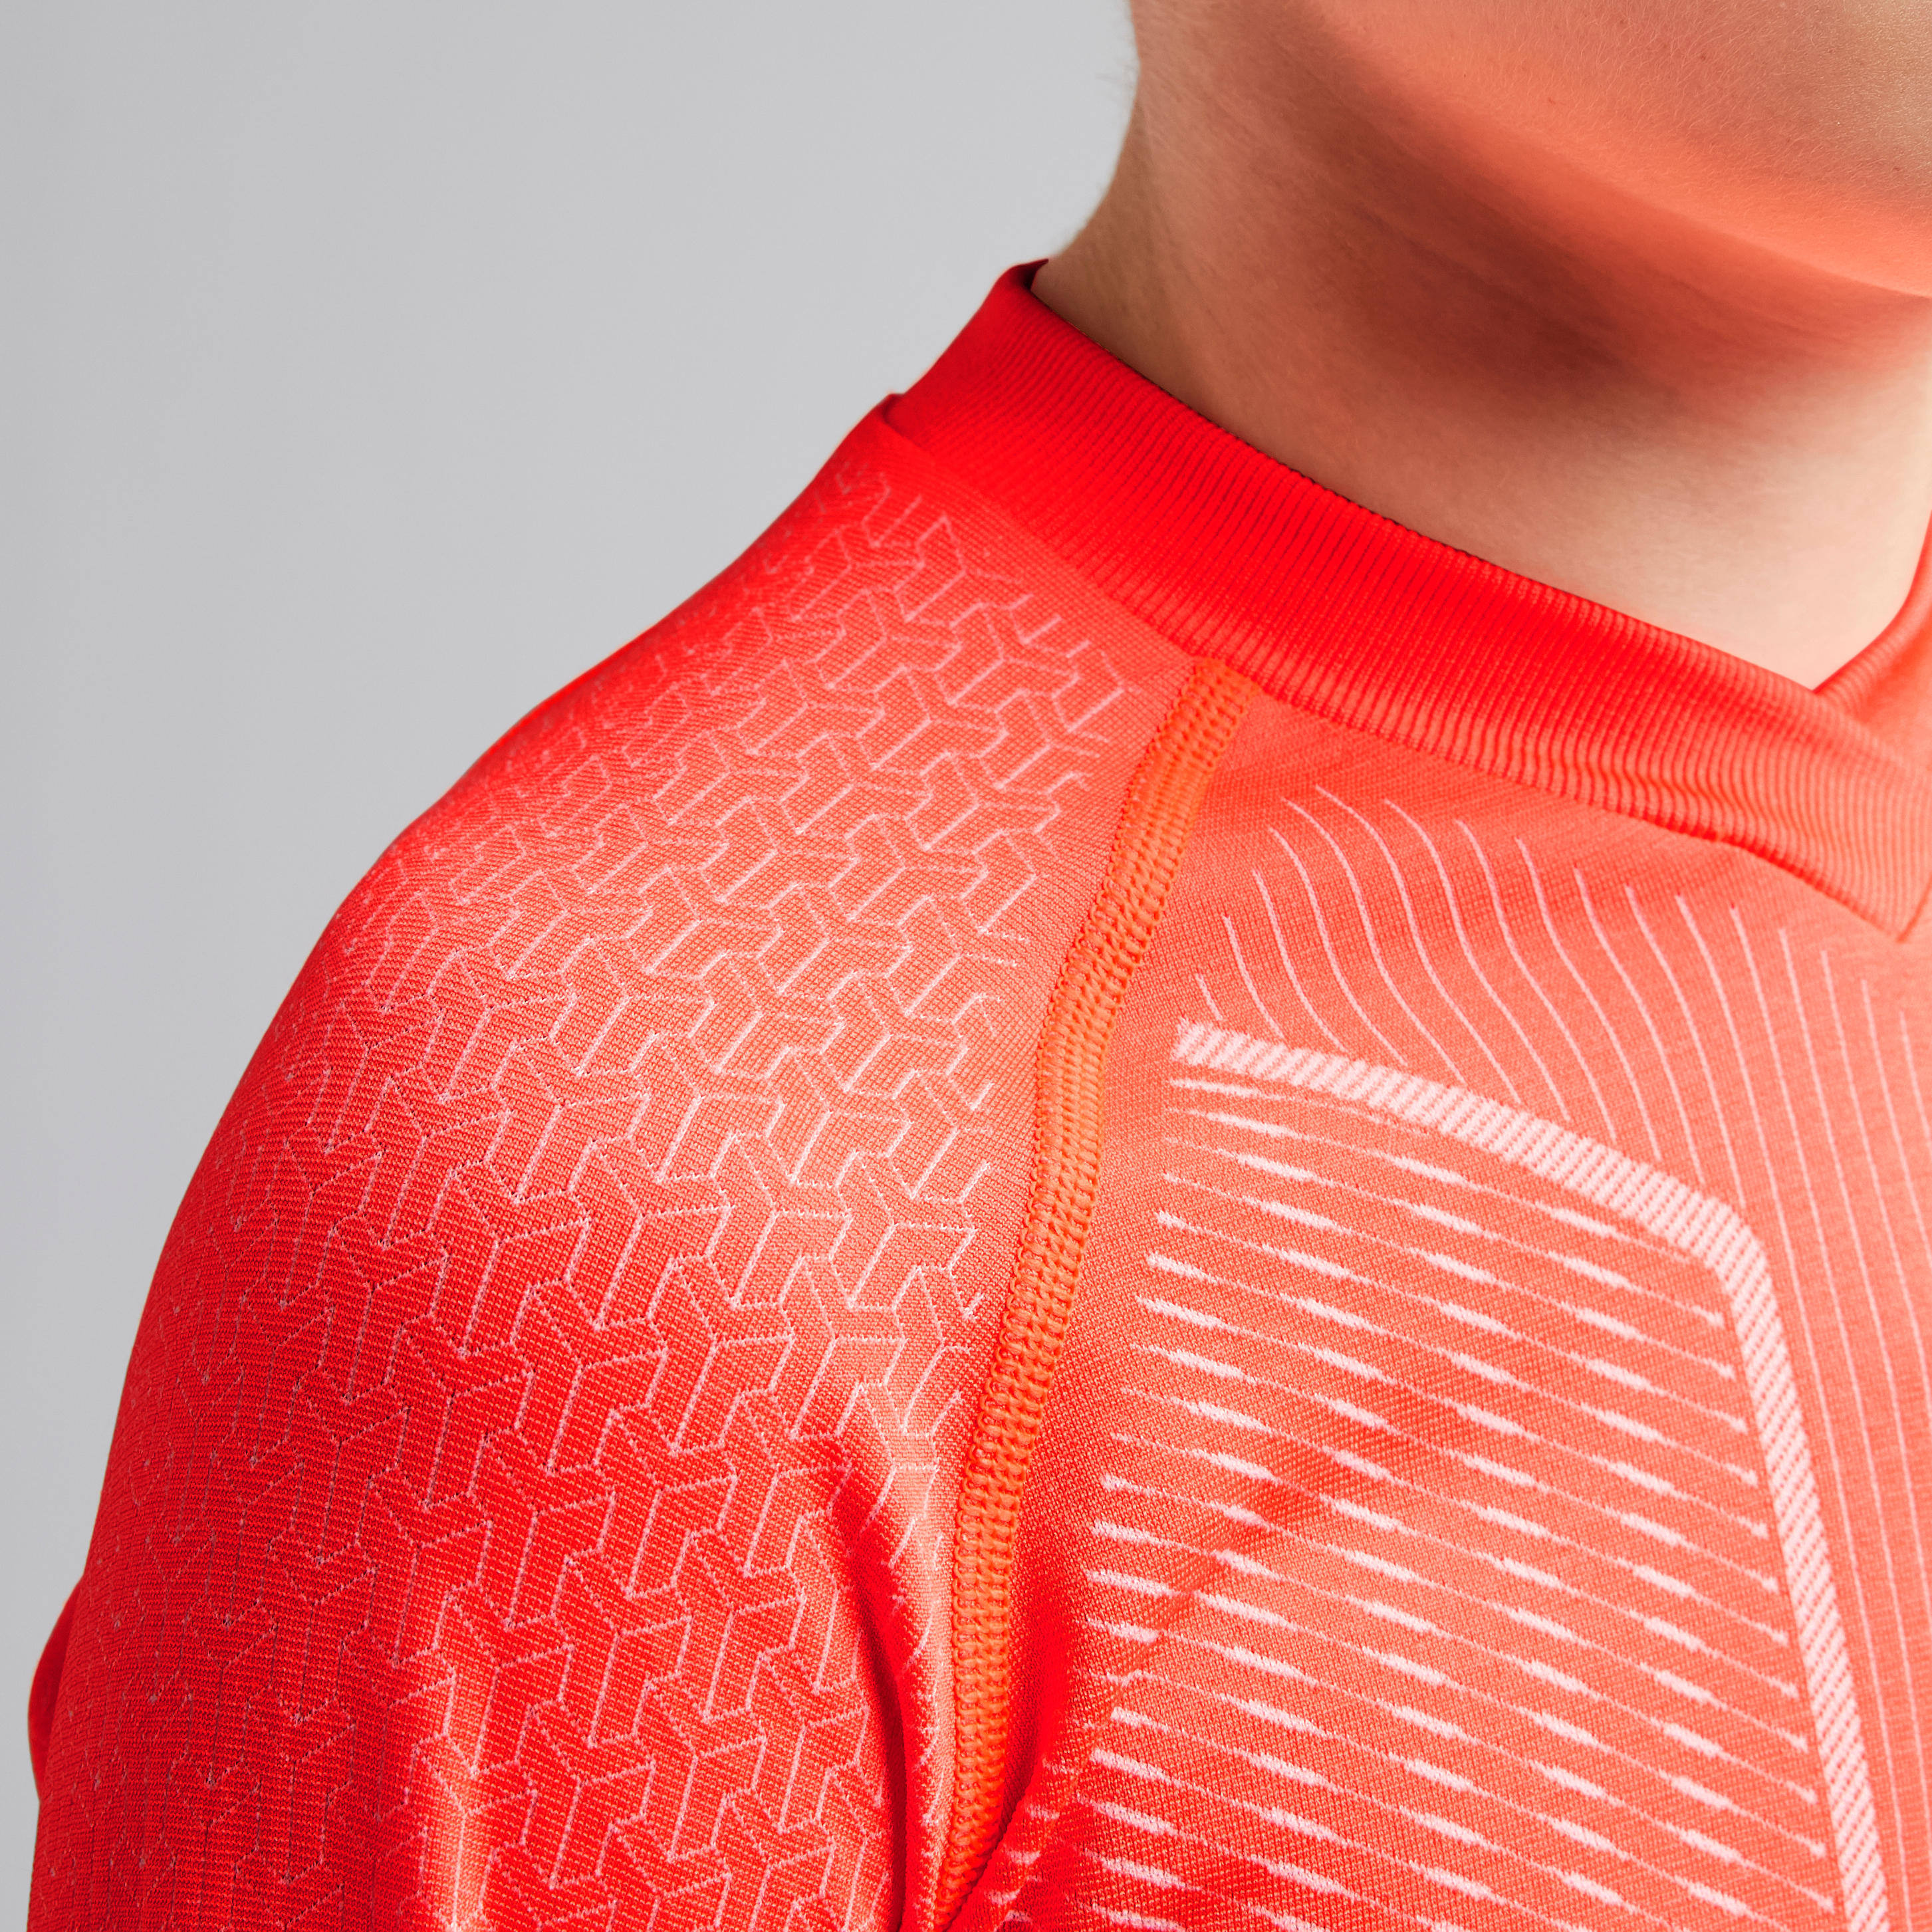 Kids' Long-Sleeved Football Base Layer Top Keepdry 500 - Red 7/9